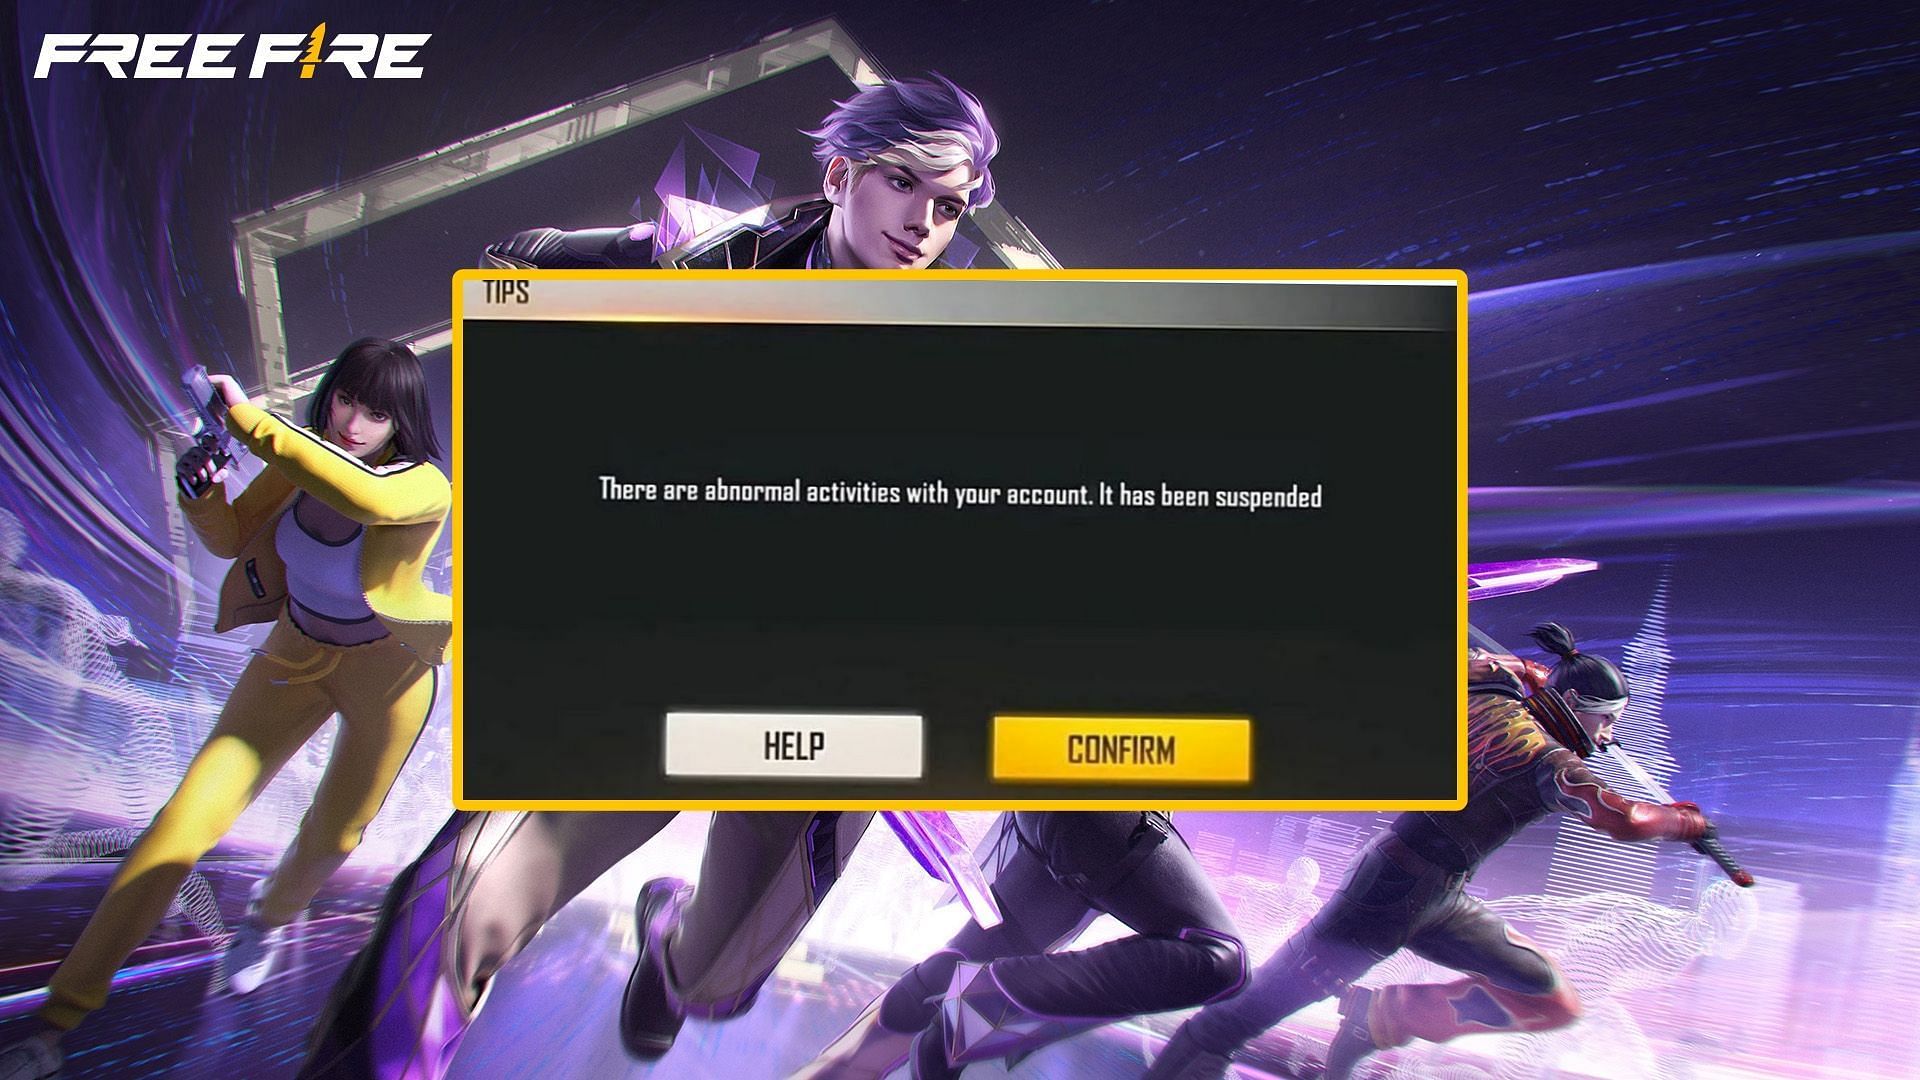 How to use the help center to send an appeal against a ban in Free Fire? (Image via Garena)